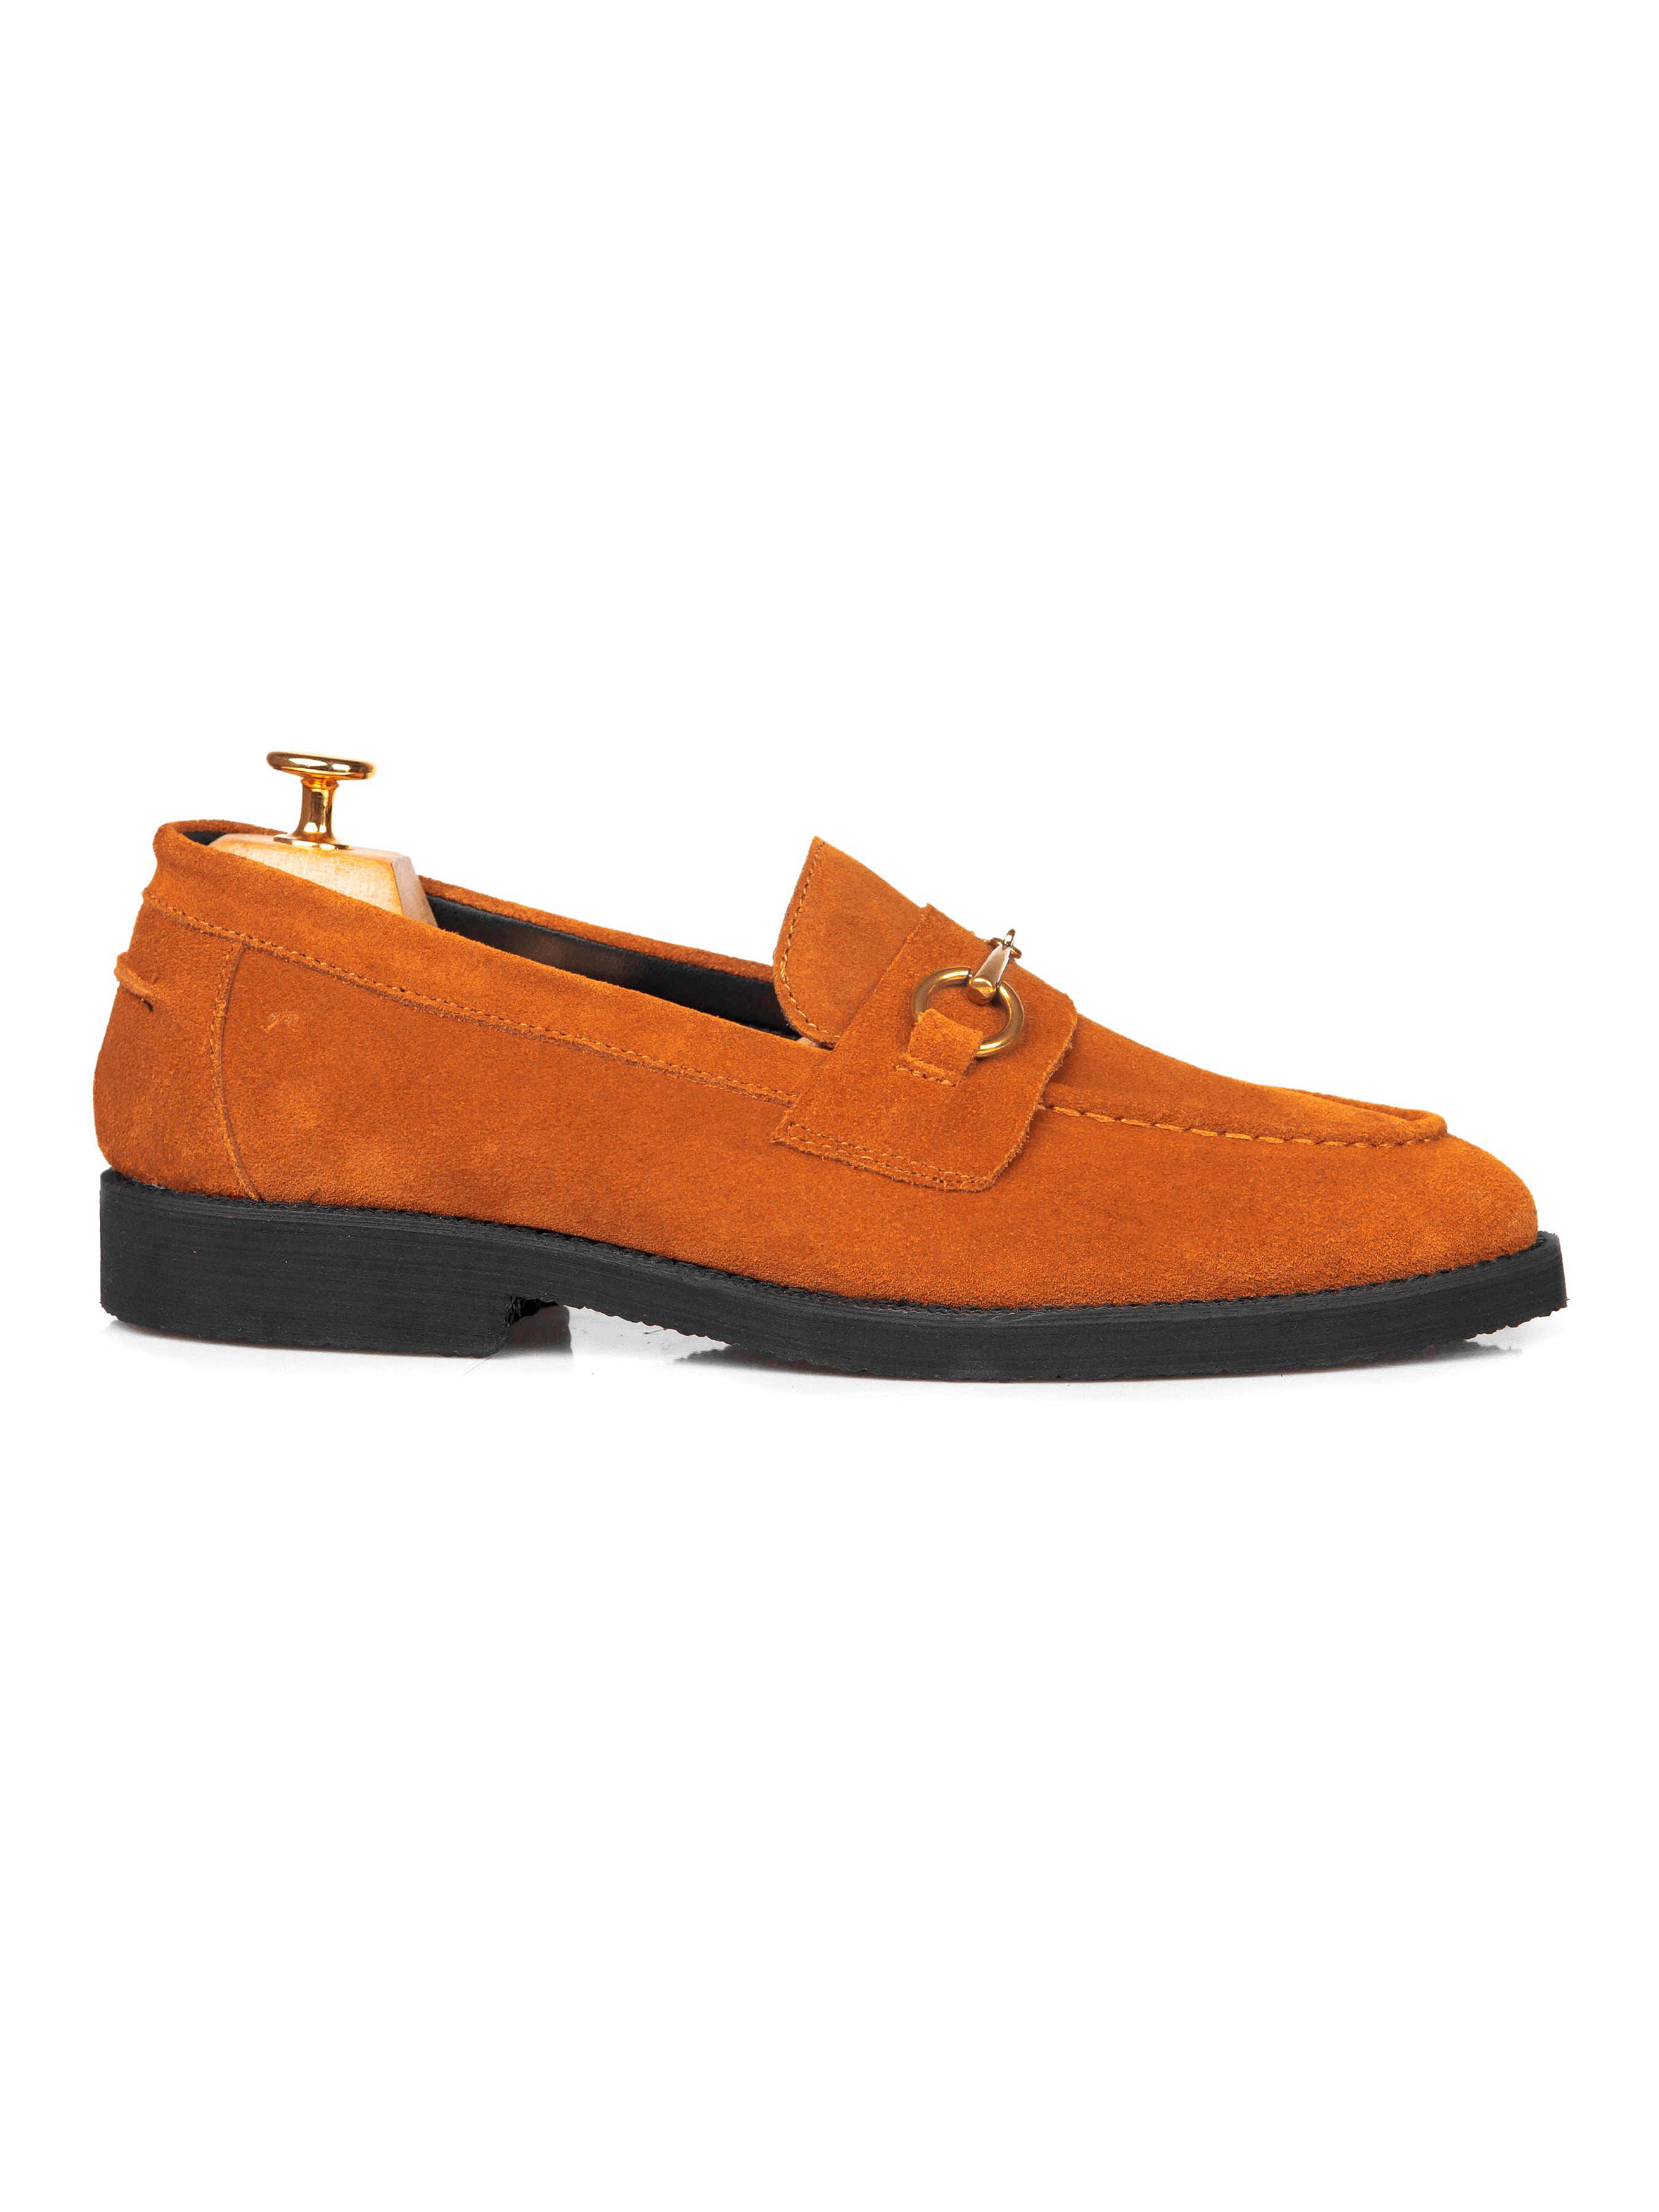 Penny Loafer Horsebit Buckle - Tangerine Suede Leather (Crepe Sole)